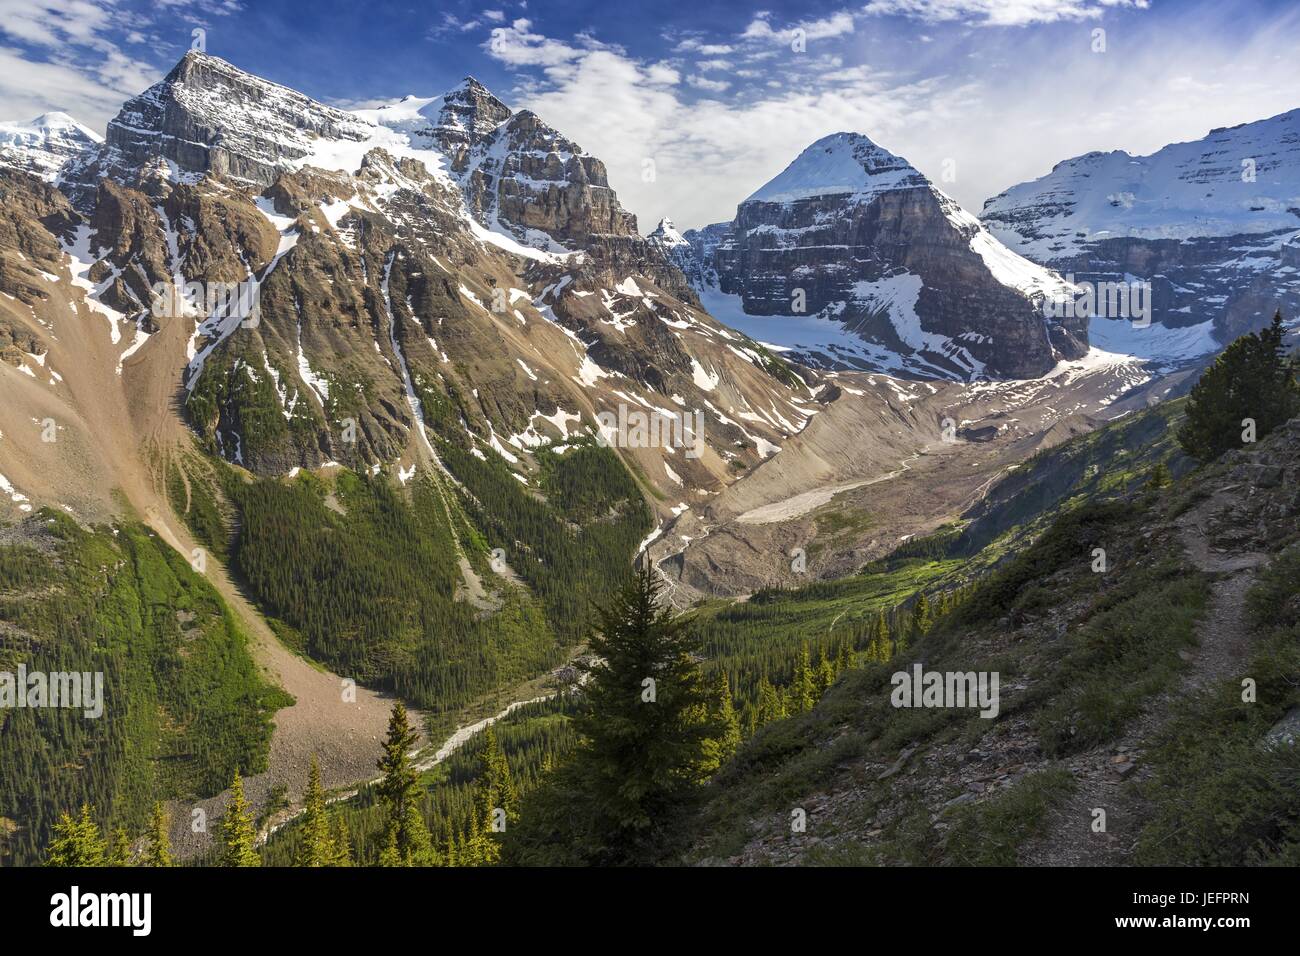 Scenic Aerial Landscape View Distant Snowy Rocky Mountains Plain of Six Glaciers Hiking Trail Sunny Summertime Day Banff National Park Alberta Canada Stock Photo